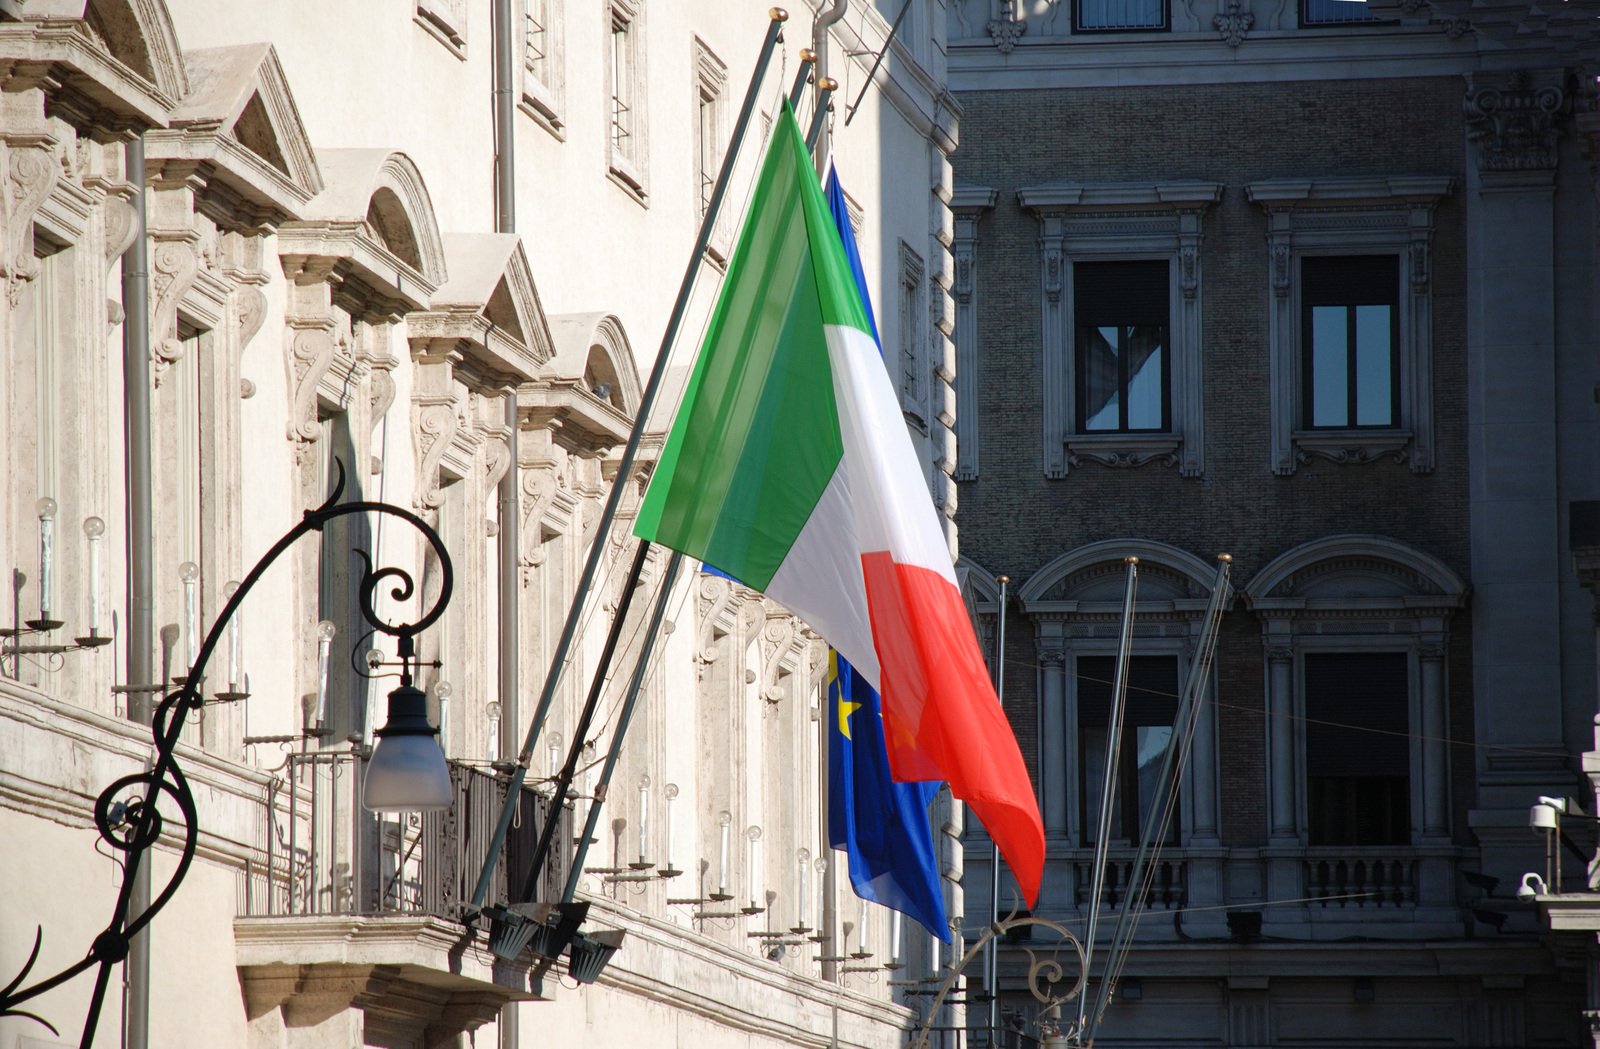 two flags are seen near many buildings on a street